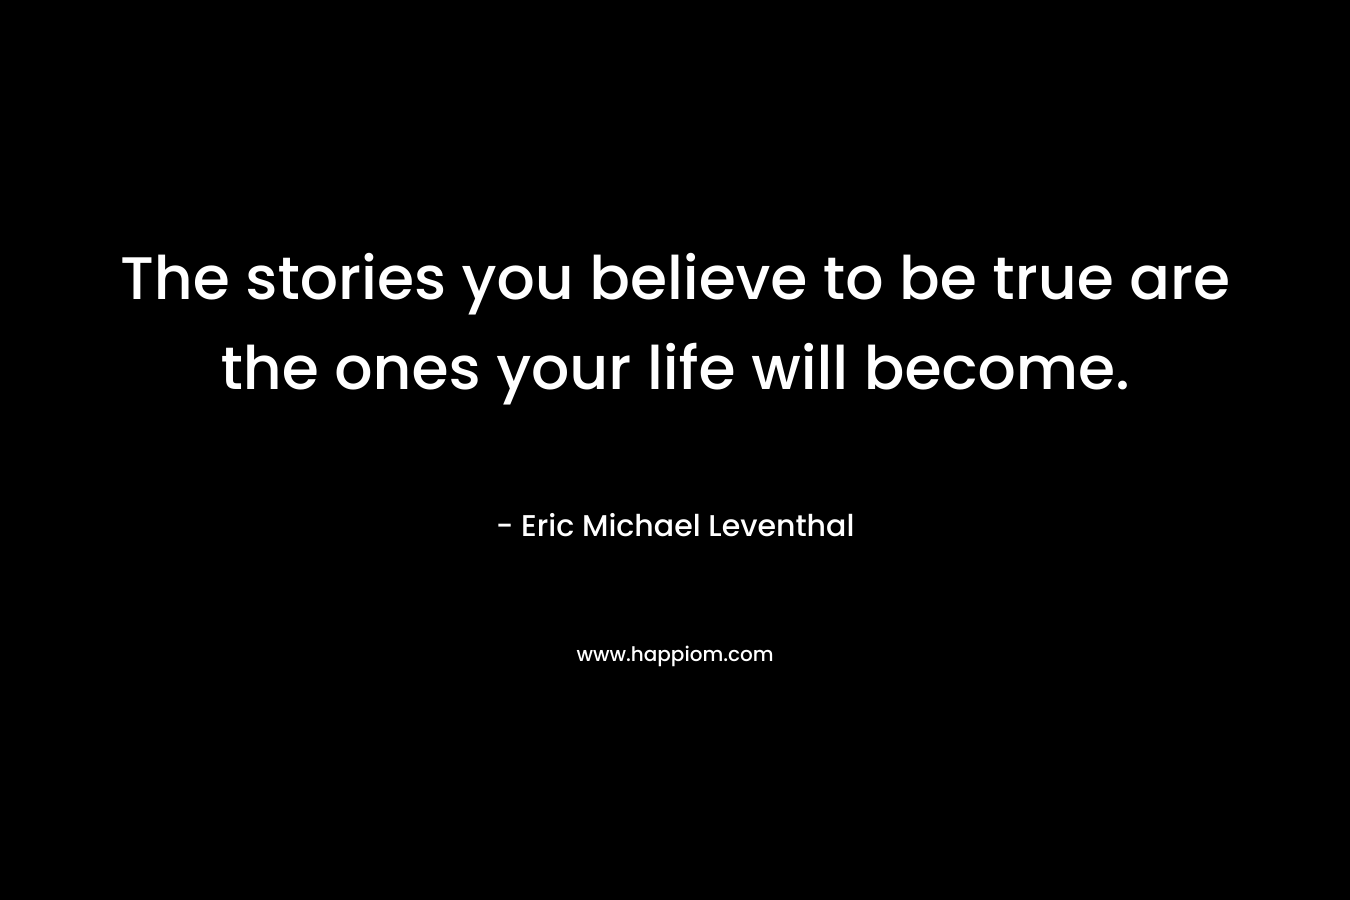 The stories you believe to be true are the ones your life will become.